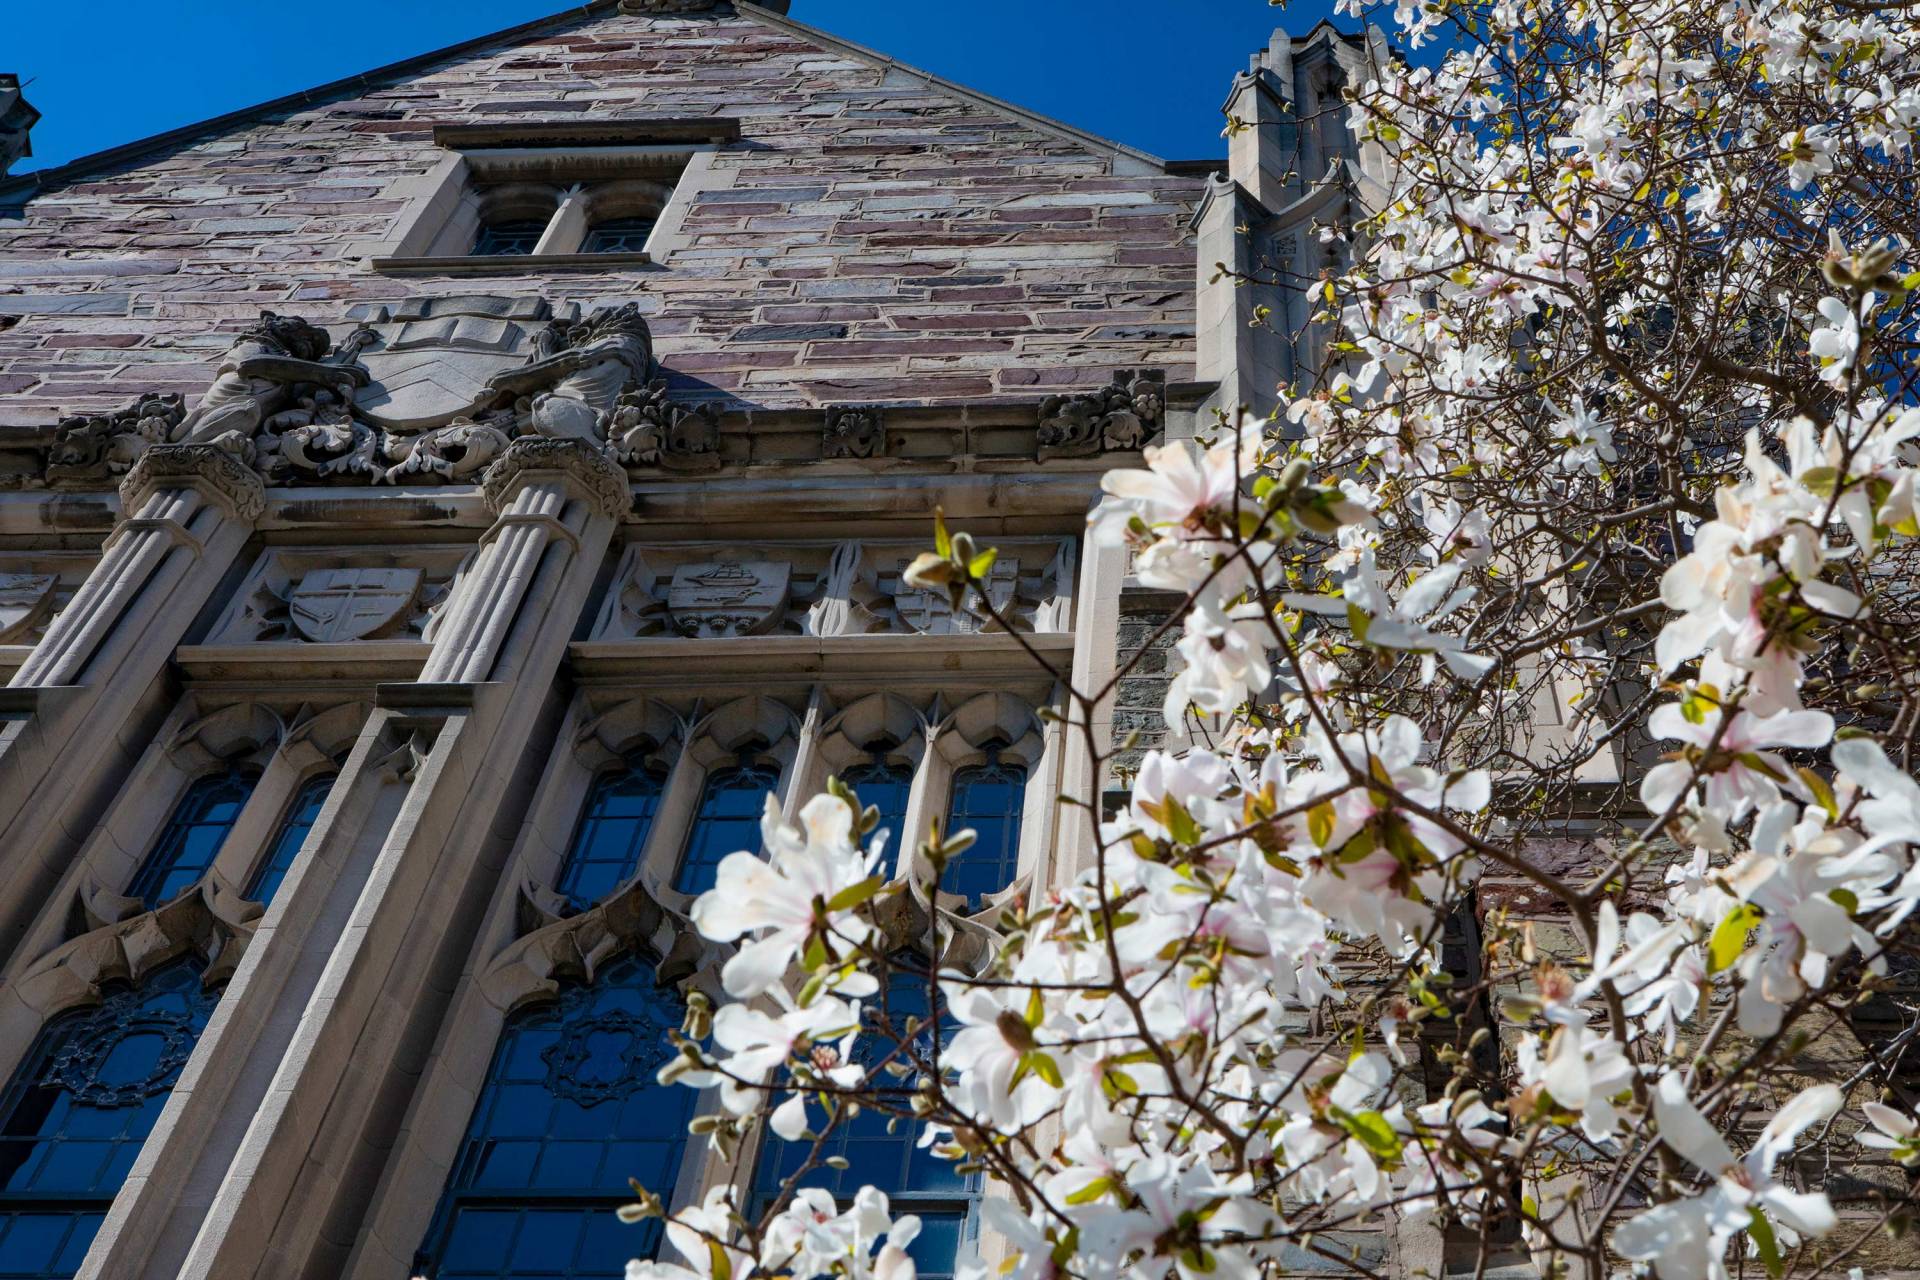 Campus beauty with white magnolias